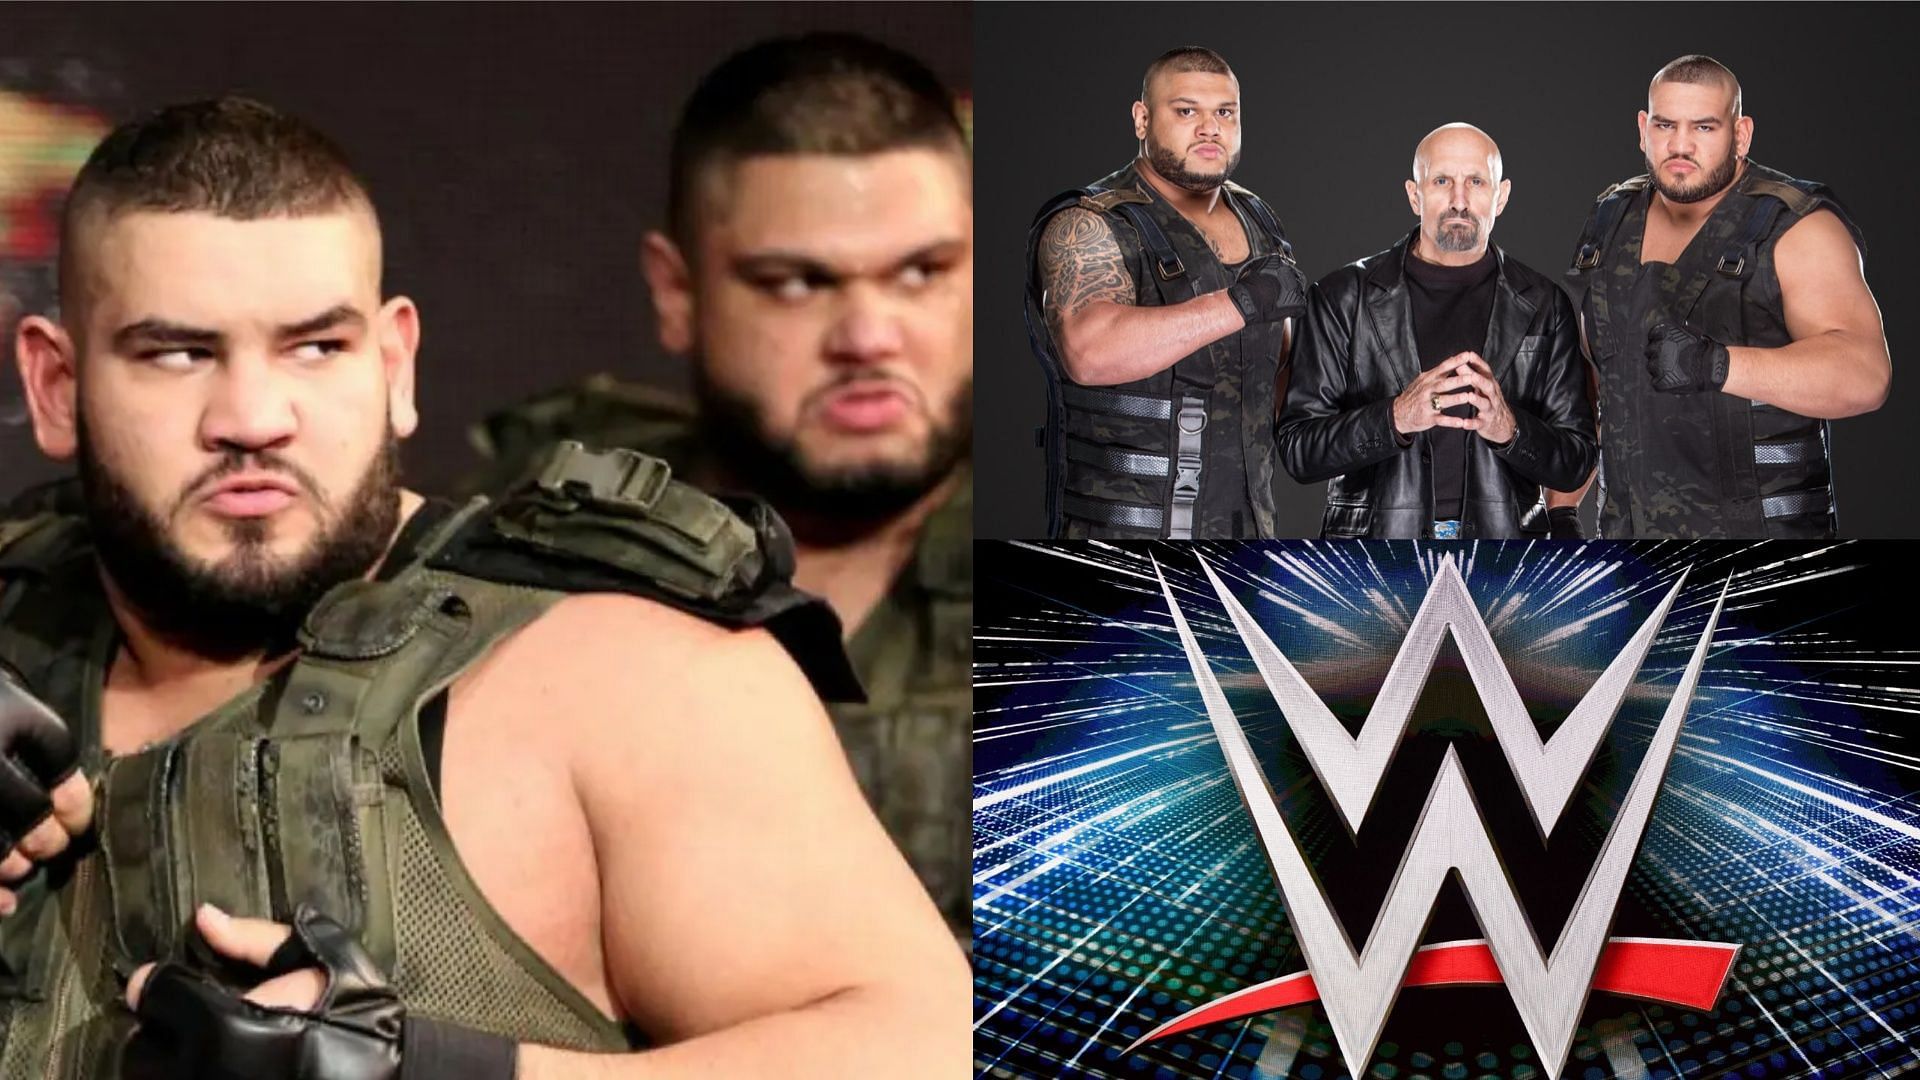 When will the WWE Universe see The Authors of Pain again?